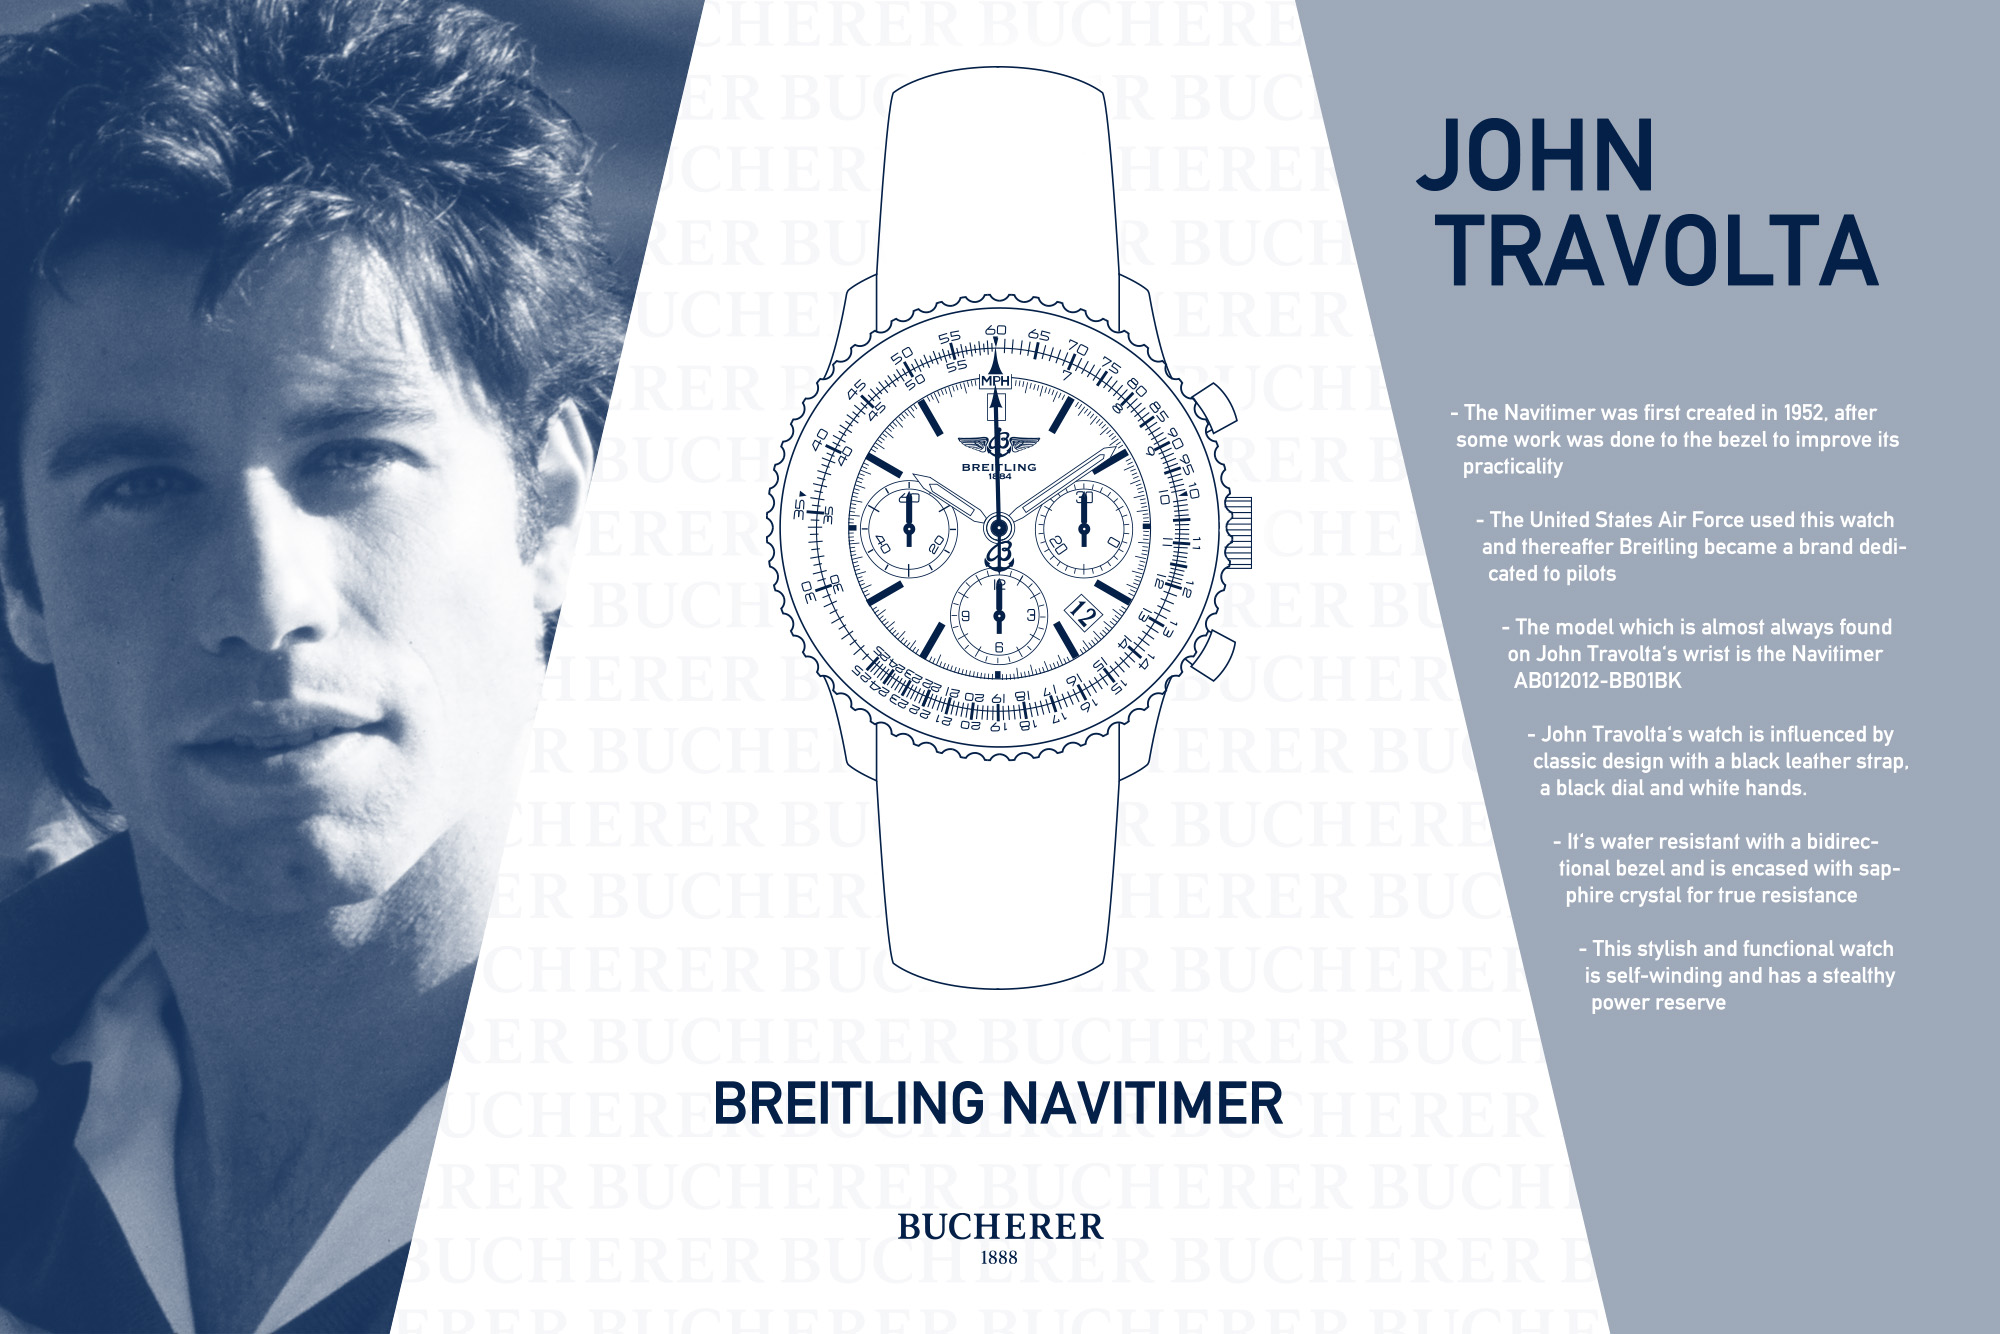 john-travolta-and-his-favourite-breitling-watch-the-navitimer